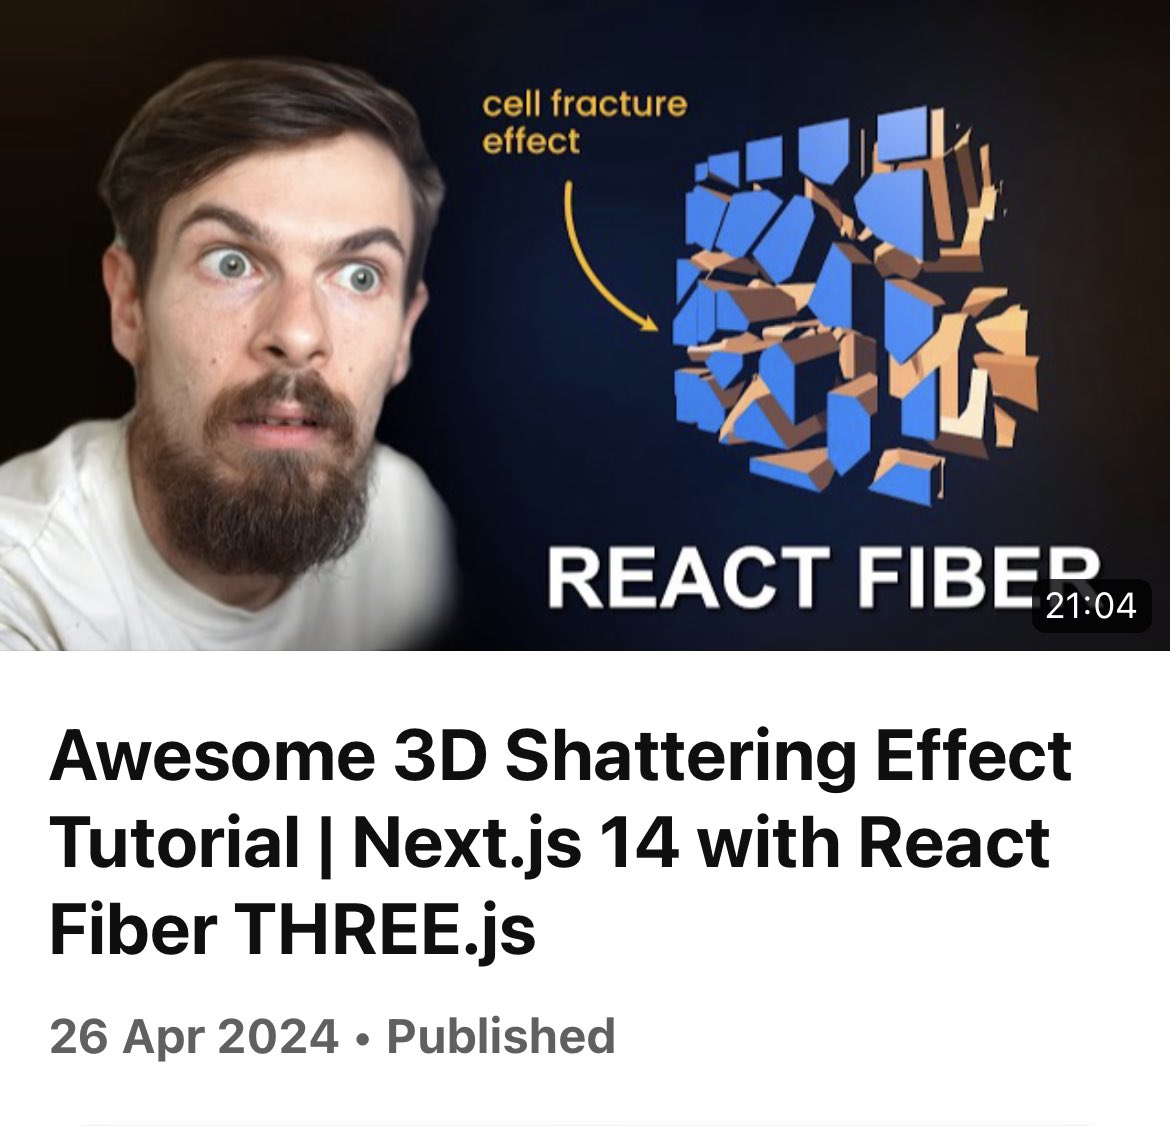 So happy you guys enjoying my THREE.js, react fiber videos 🔥 New video out, let’s make 3D models explode in nextjs. Tutorial here Awesome 3D Shattering Effect Tutorial | Next.js 14 with React Fiber THREE.js youtu.be/hIjUo5NwlPk